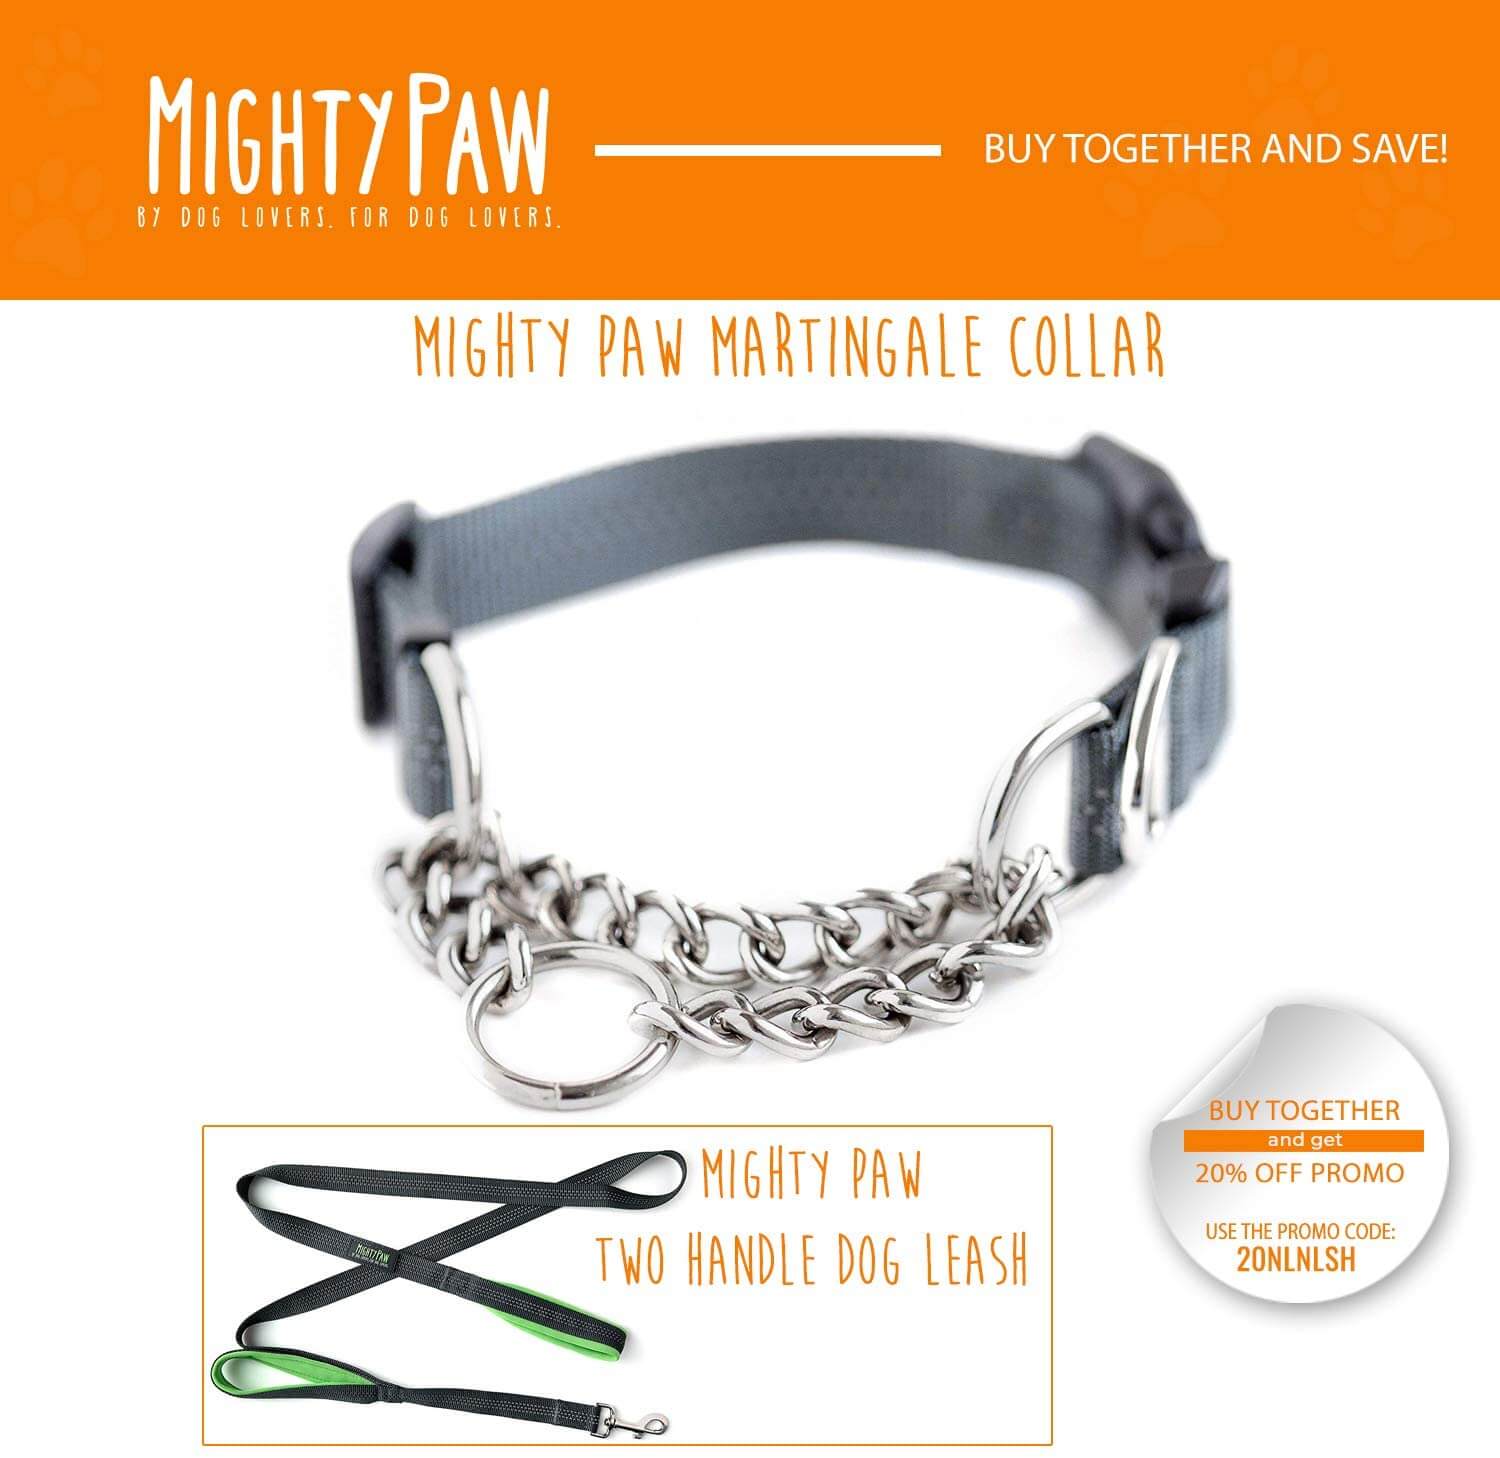 Mighty Paw Martingale Cinch Collar for Dogs